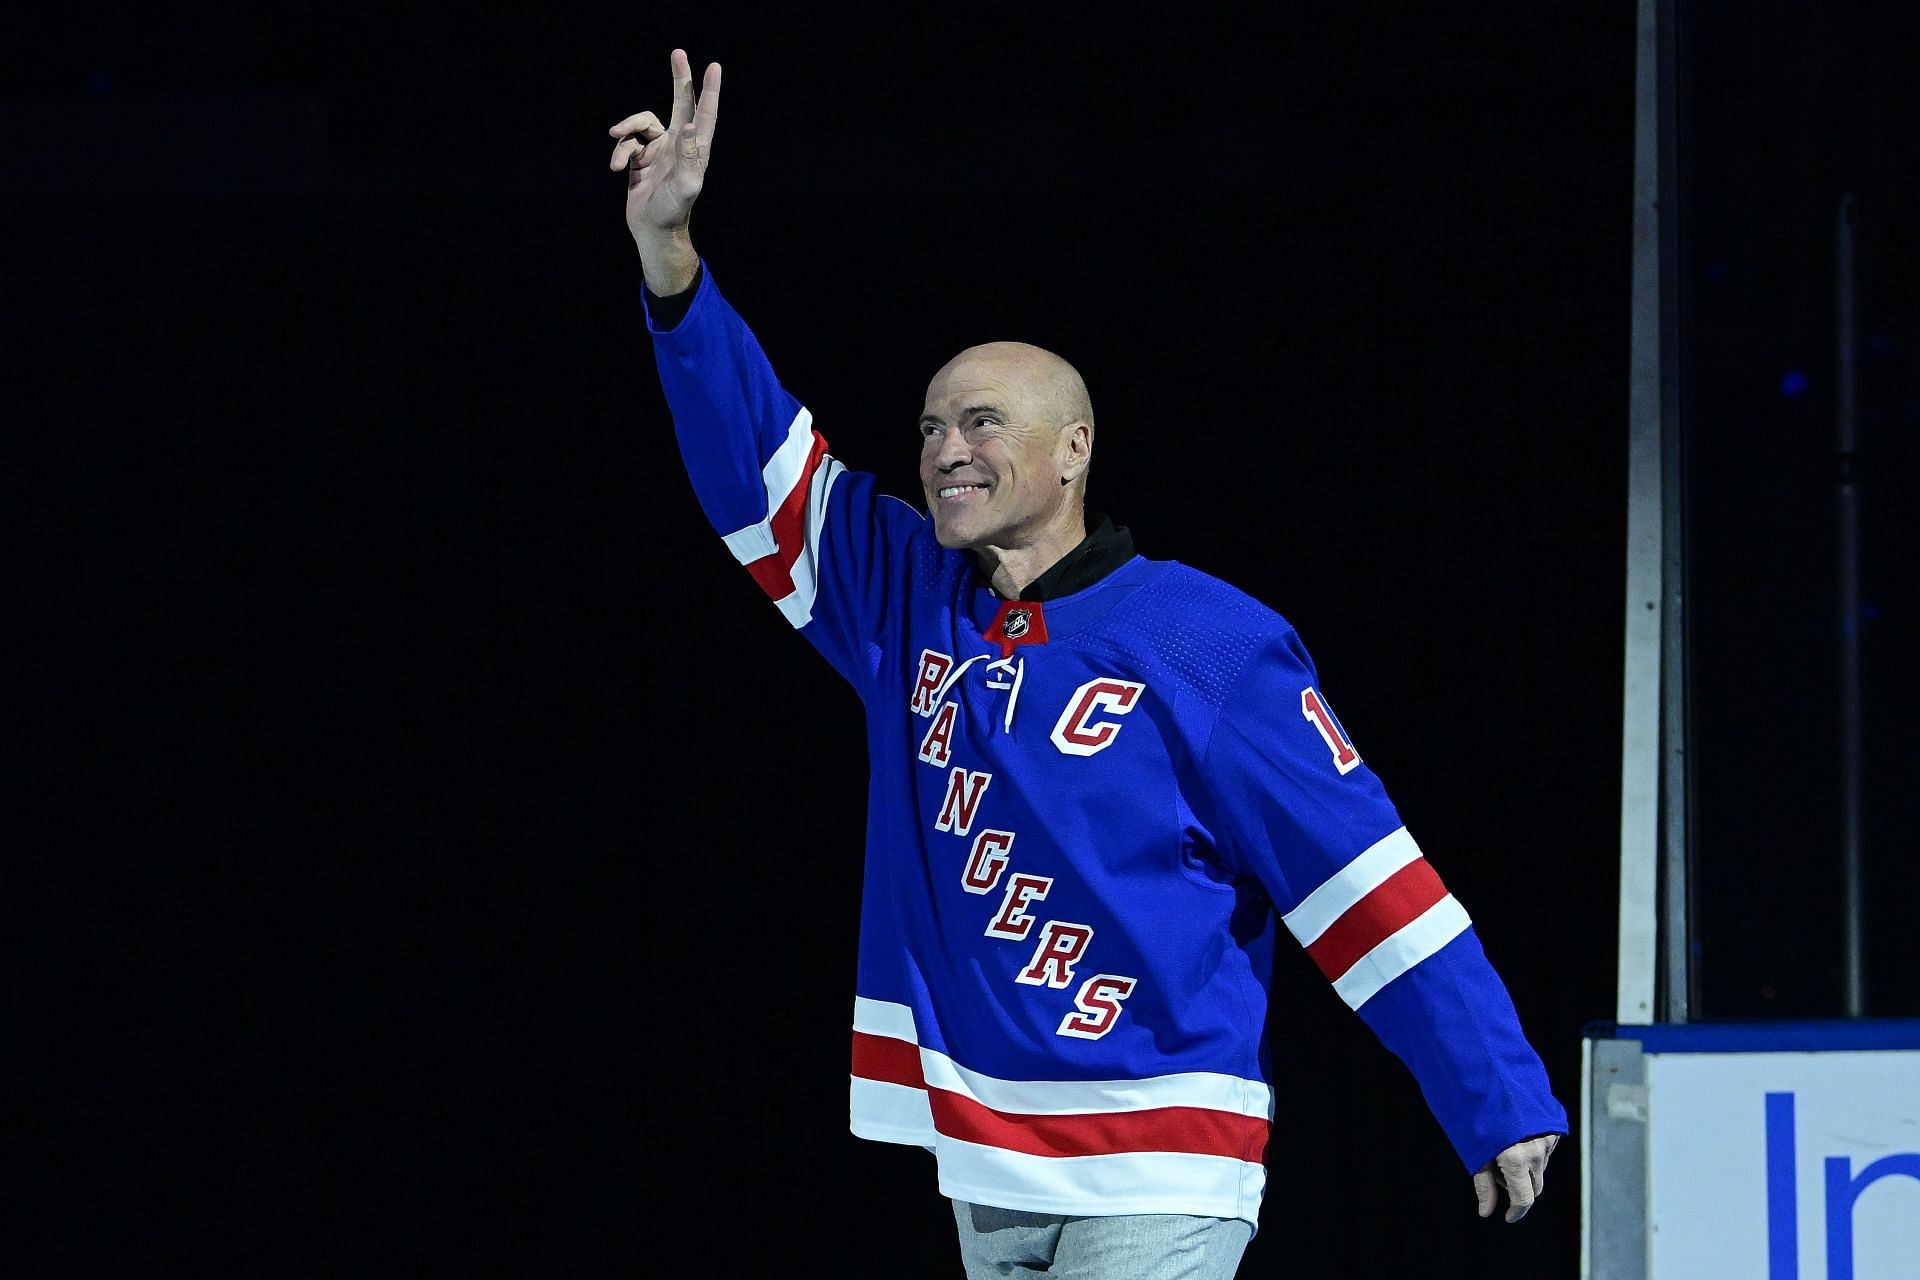 Mark Messier was a 15-time NHL All-Star